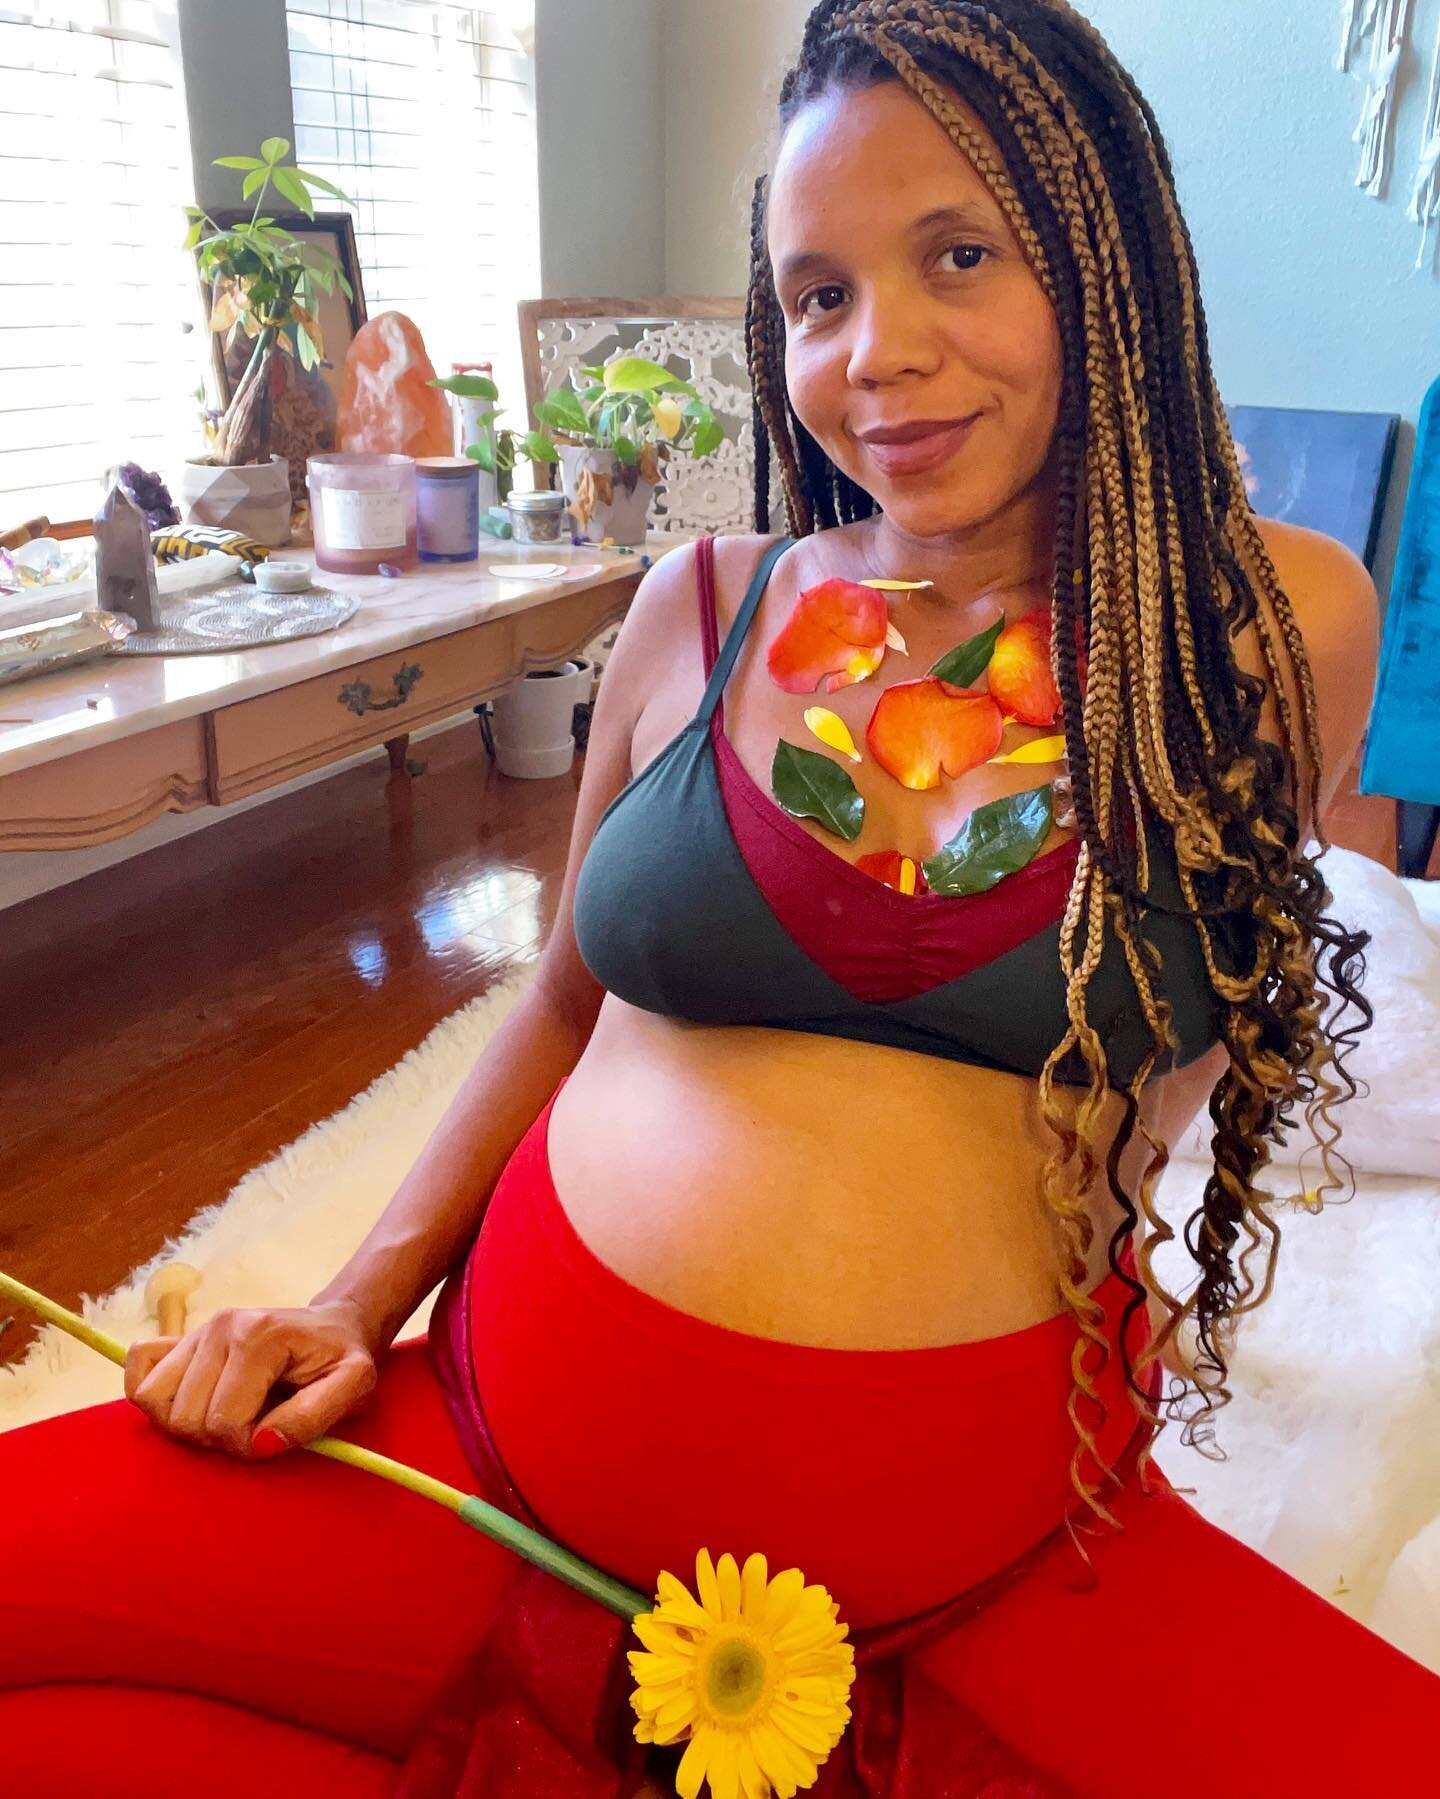 SACRED BIRTH 

so honored to share that I will speaking at the @sacredbirthsymposium here in Austin March 10-11. I&rsquo;ve been invited to share my VBAC Redemption birth story, going from an unnecessary c-section where I was put under general anesth